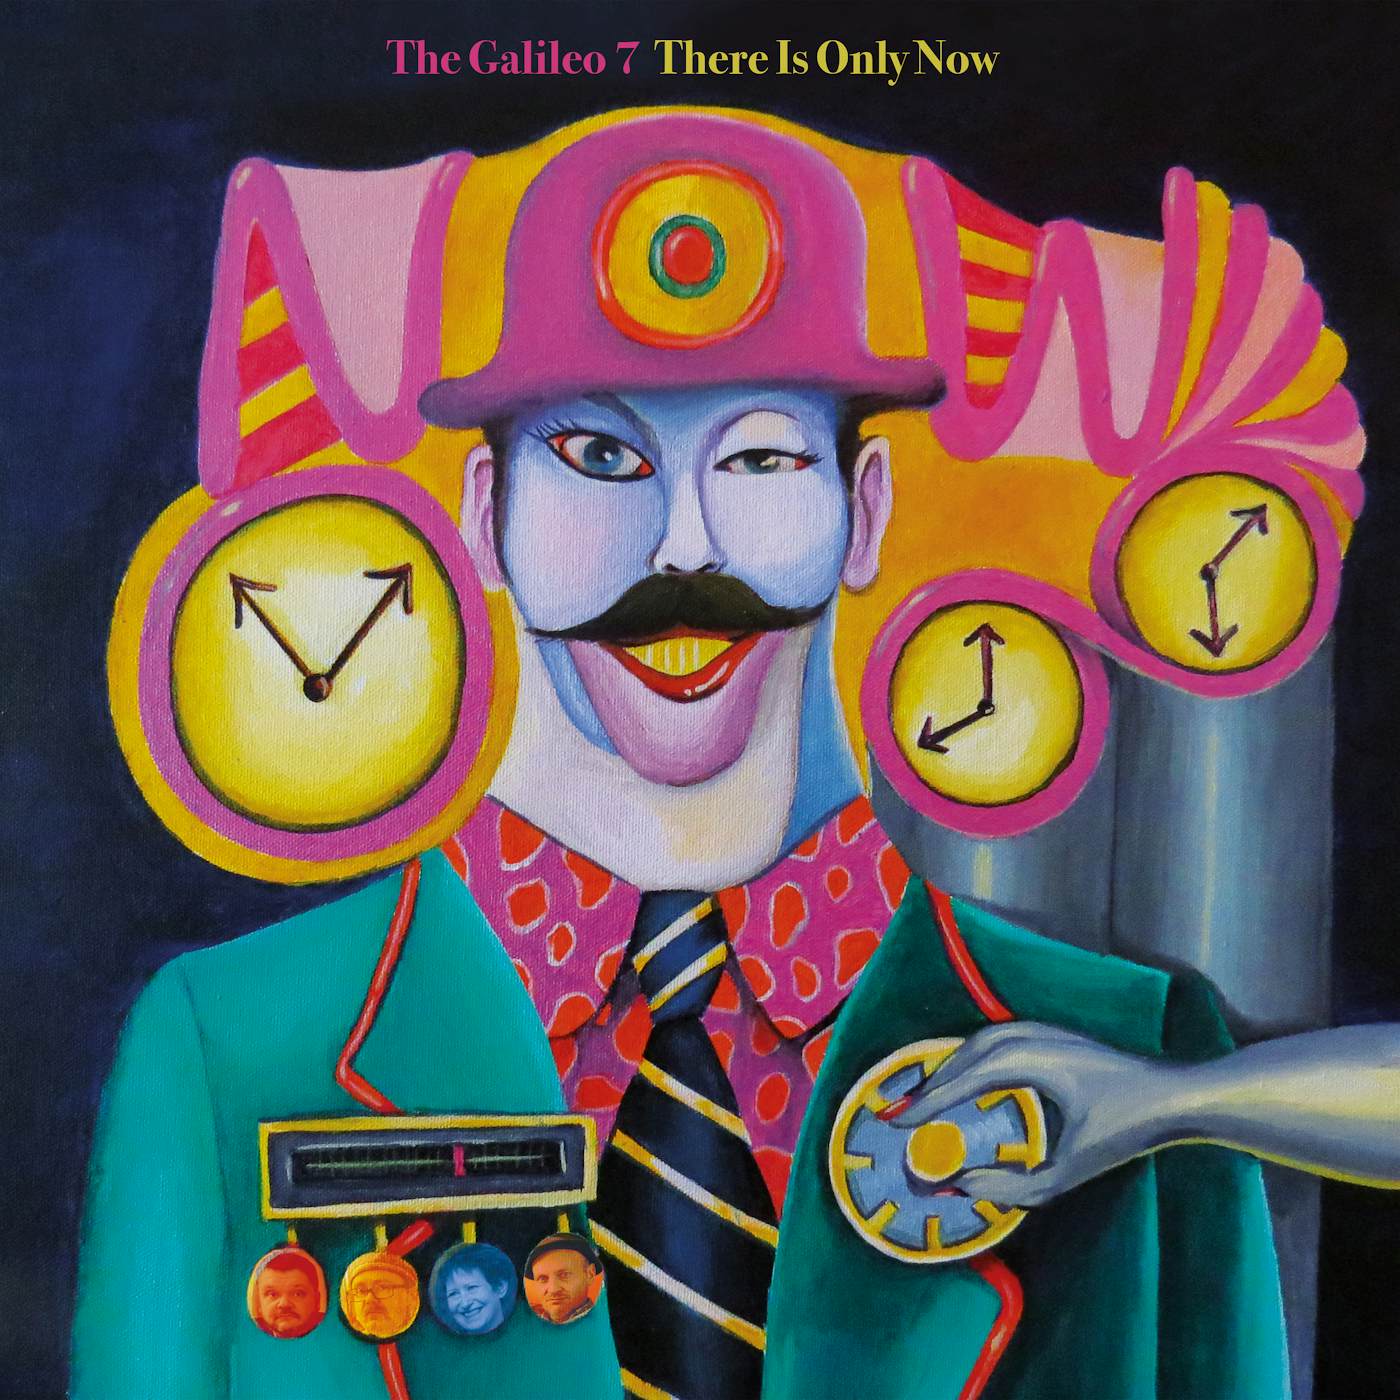 The Galileo 7 There Is Only Now Vinyl Record